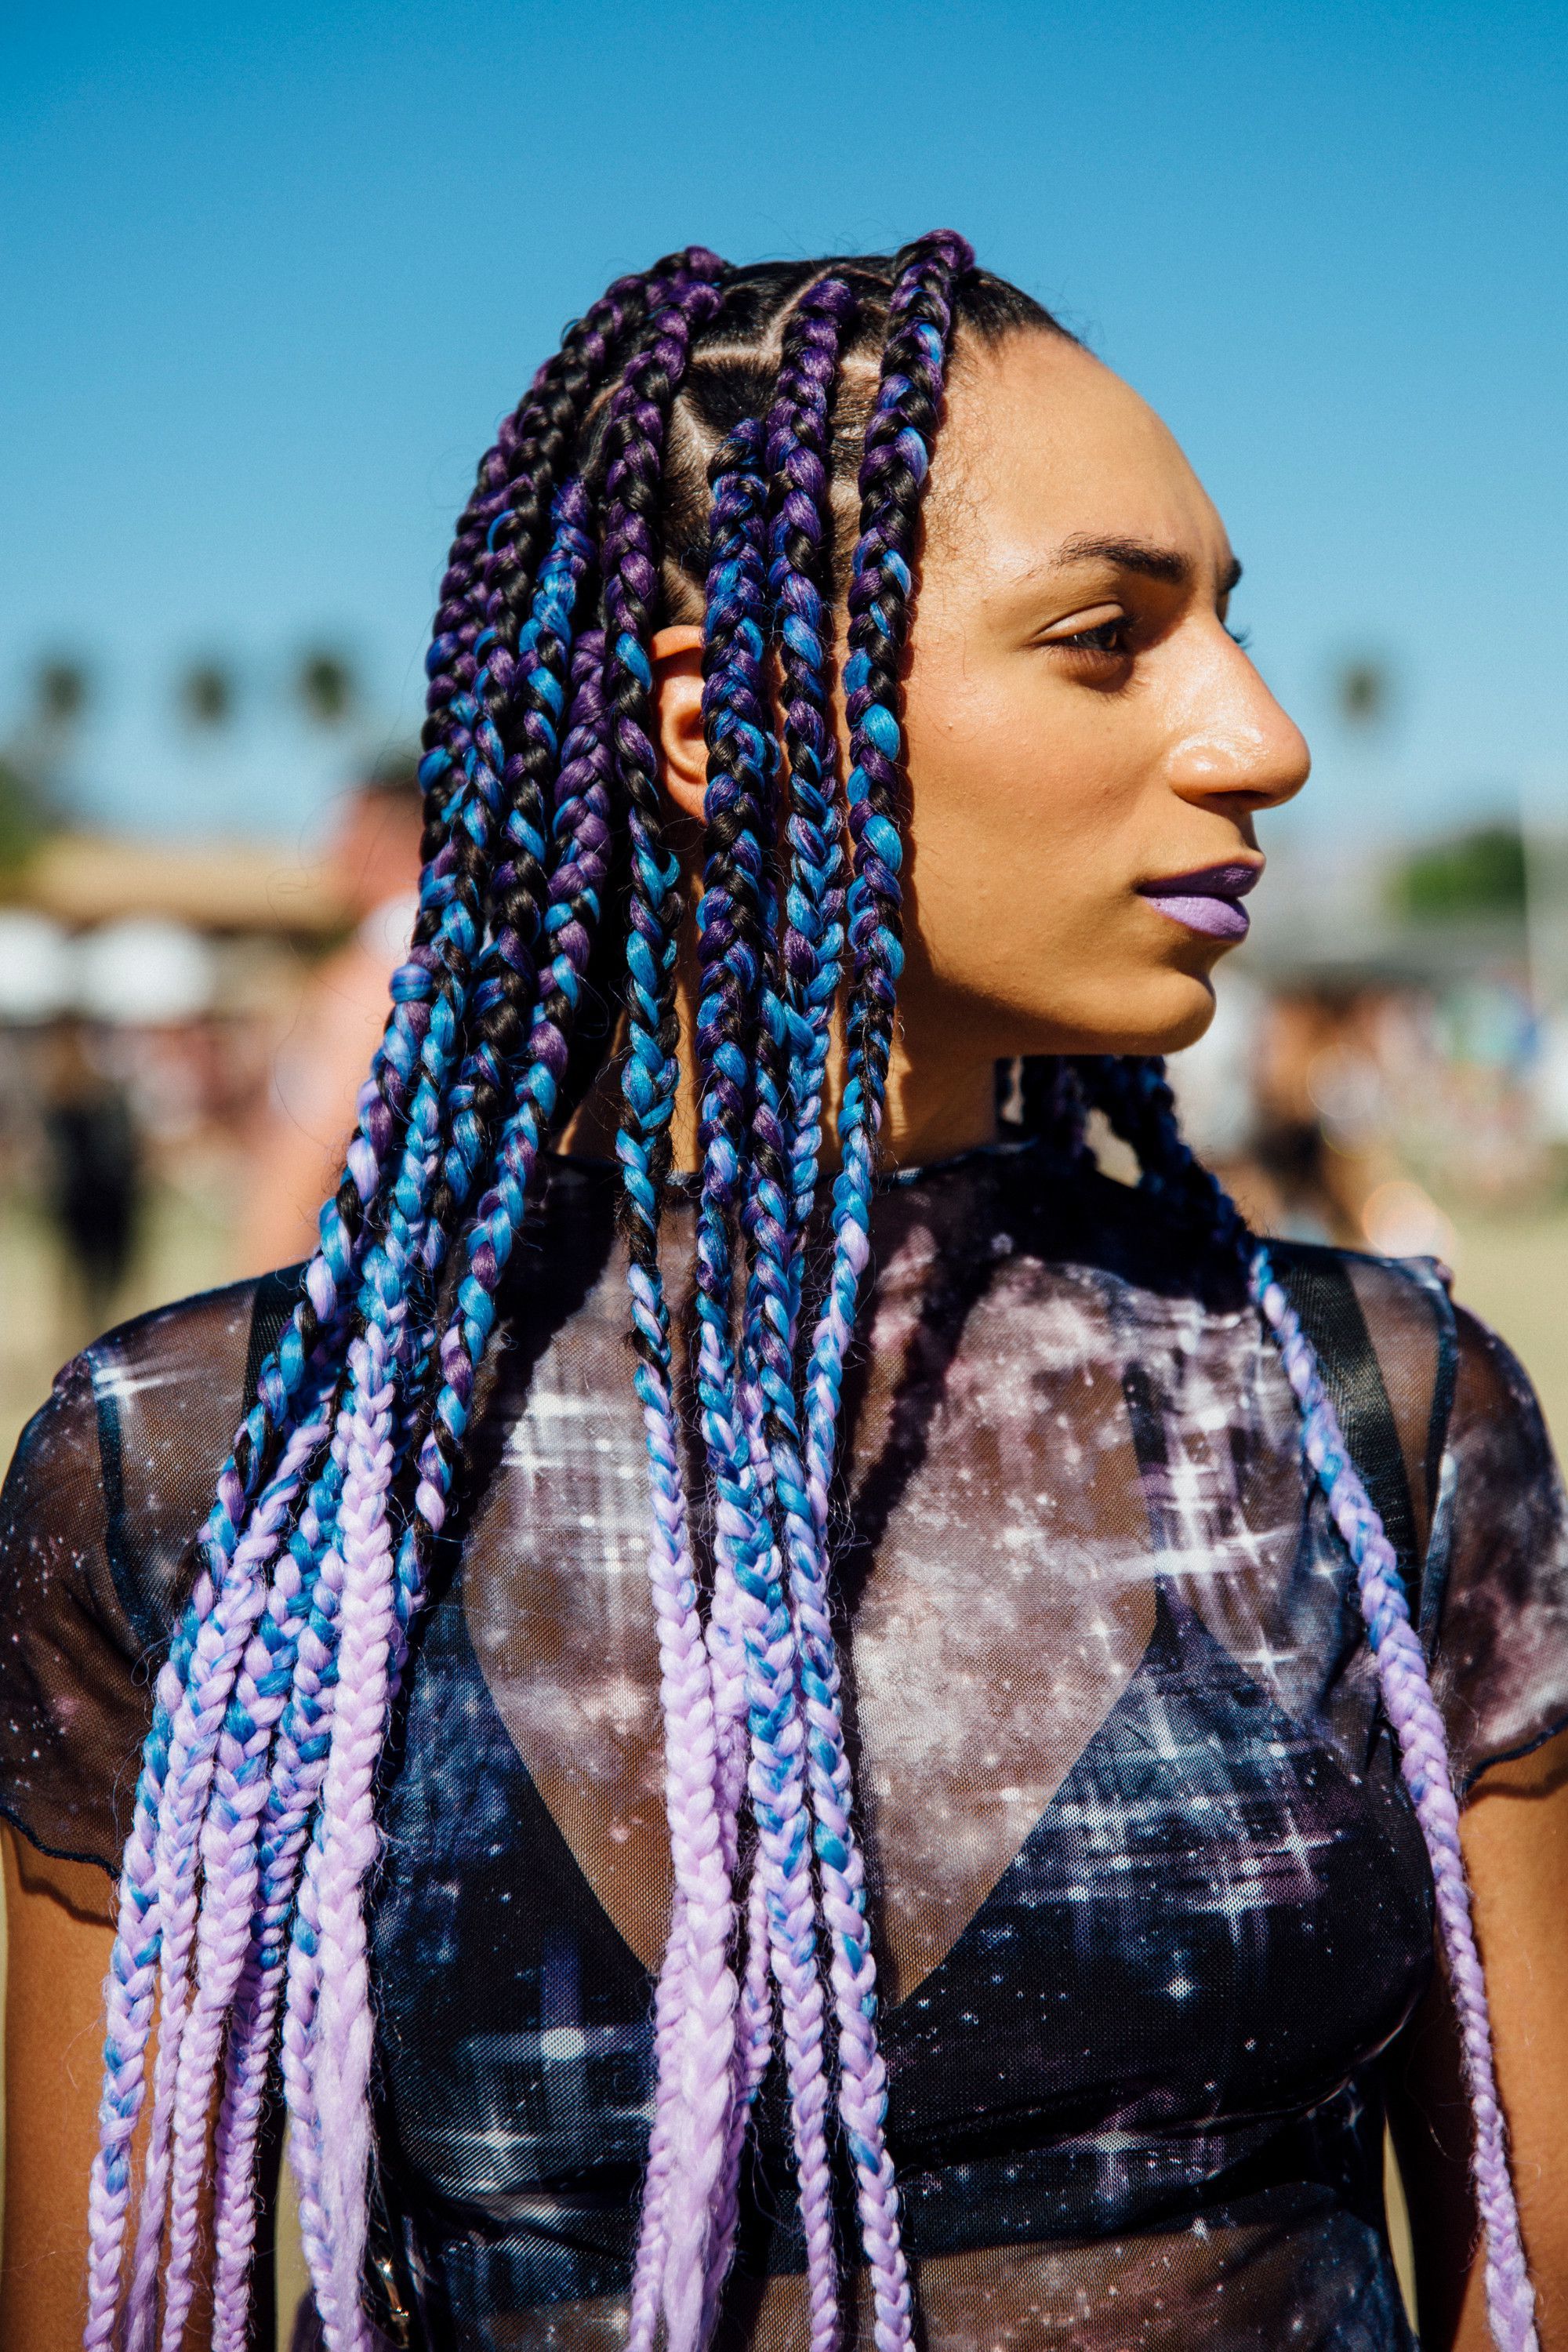 Pastel Hair Color Style Trend At Coachella Festival With Regard To 2020 Cotton Candy Colors Blend Mermaid Braid Hairstyles (View 19 of 20)